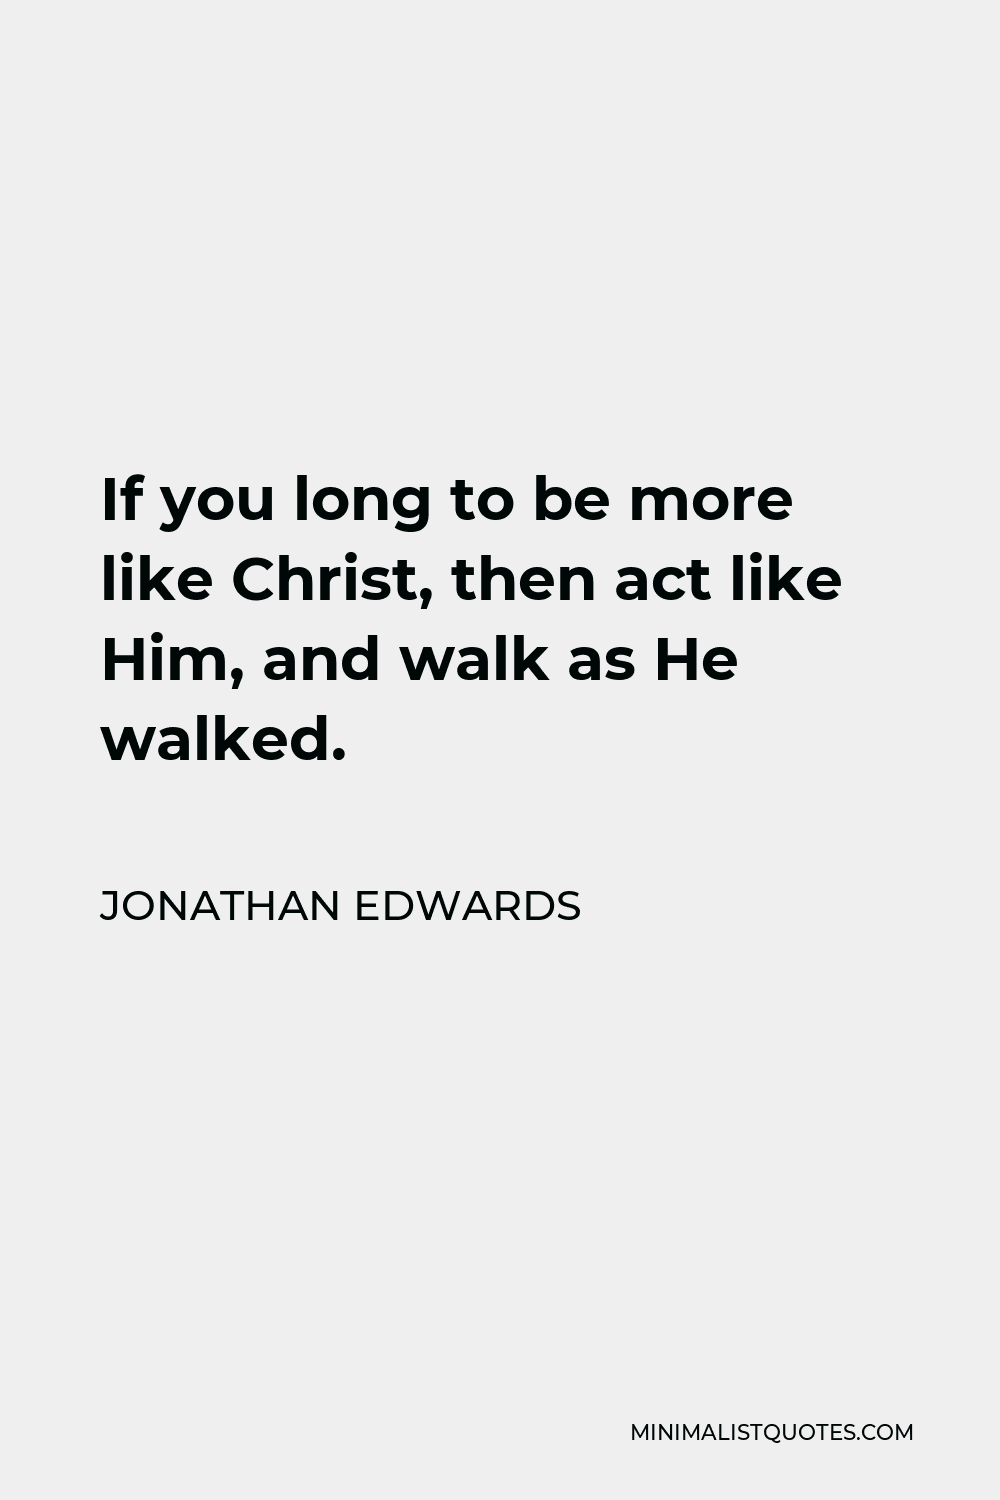 Jonathan Edwards Quote - If you long to be more like Christ, then act like Him, and walk as He walked.